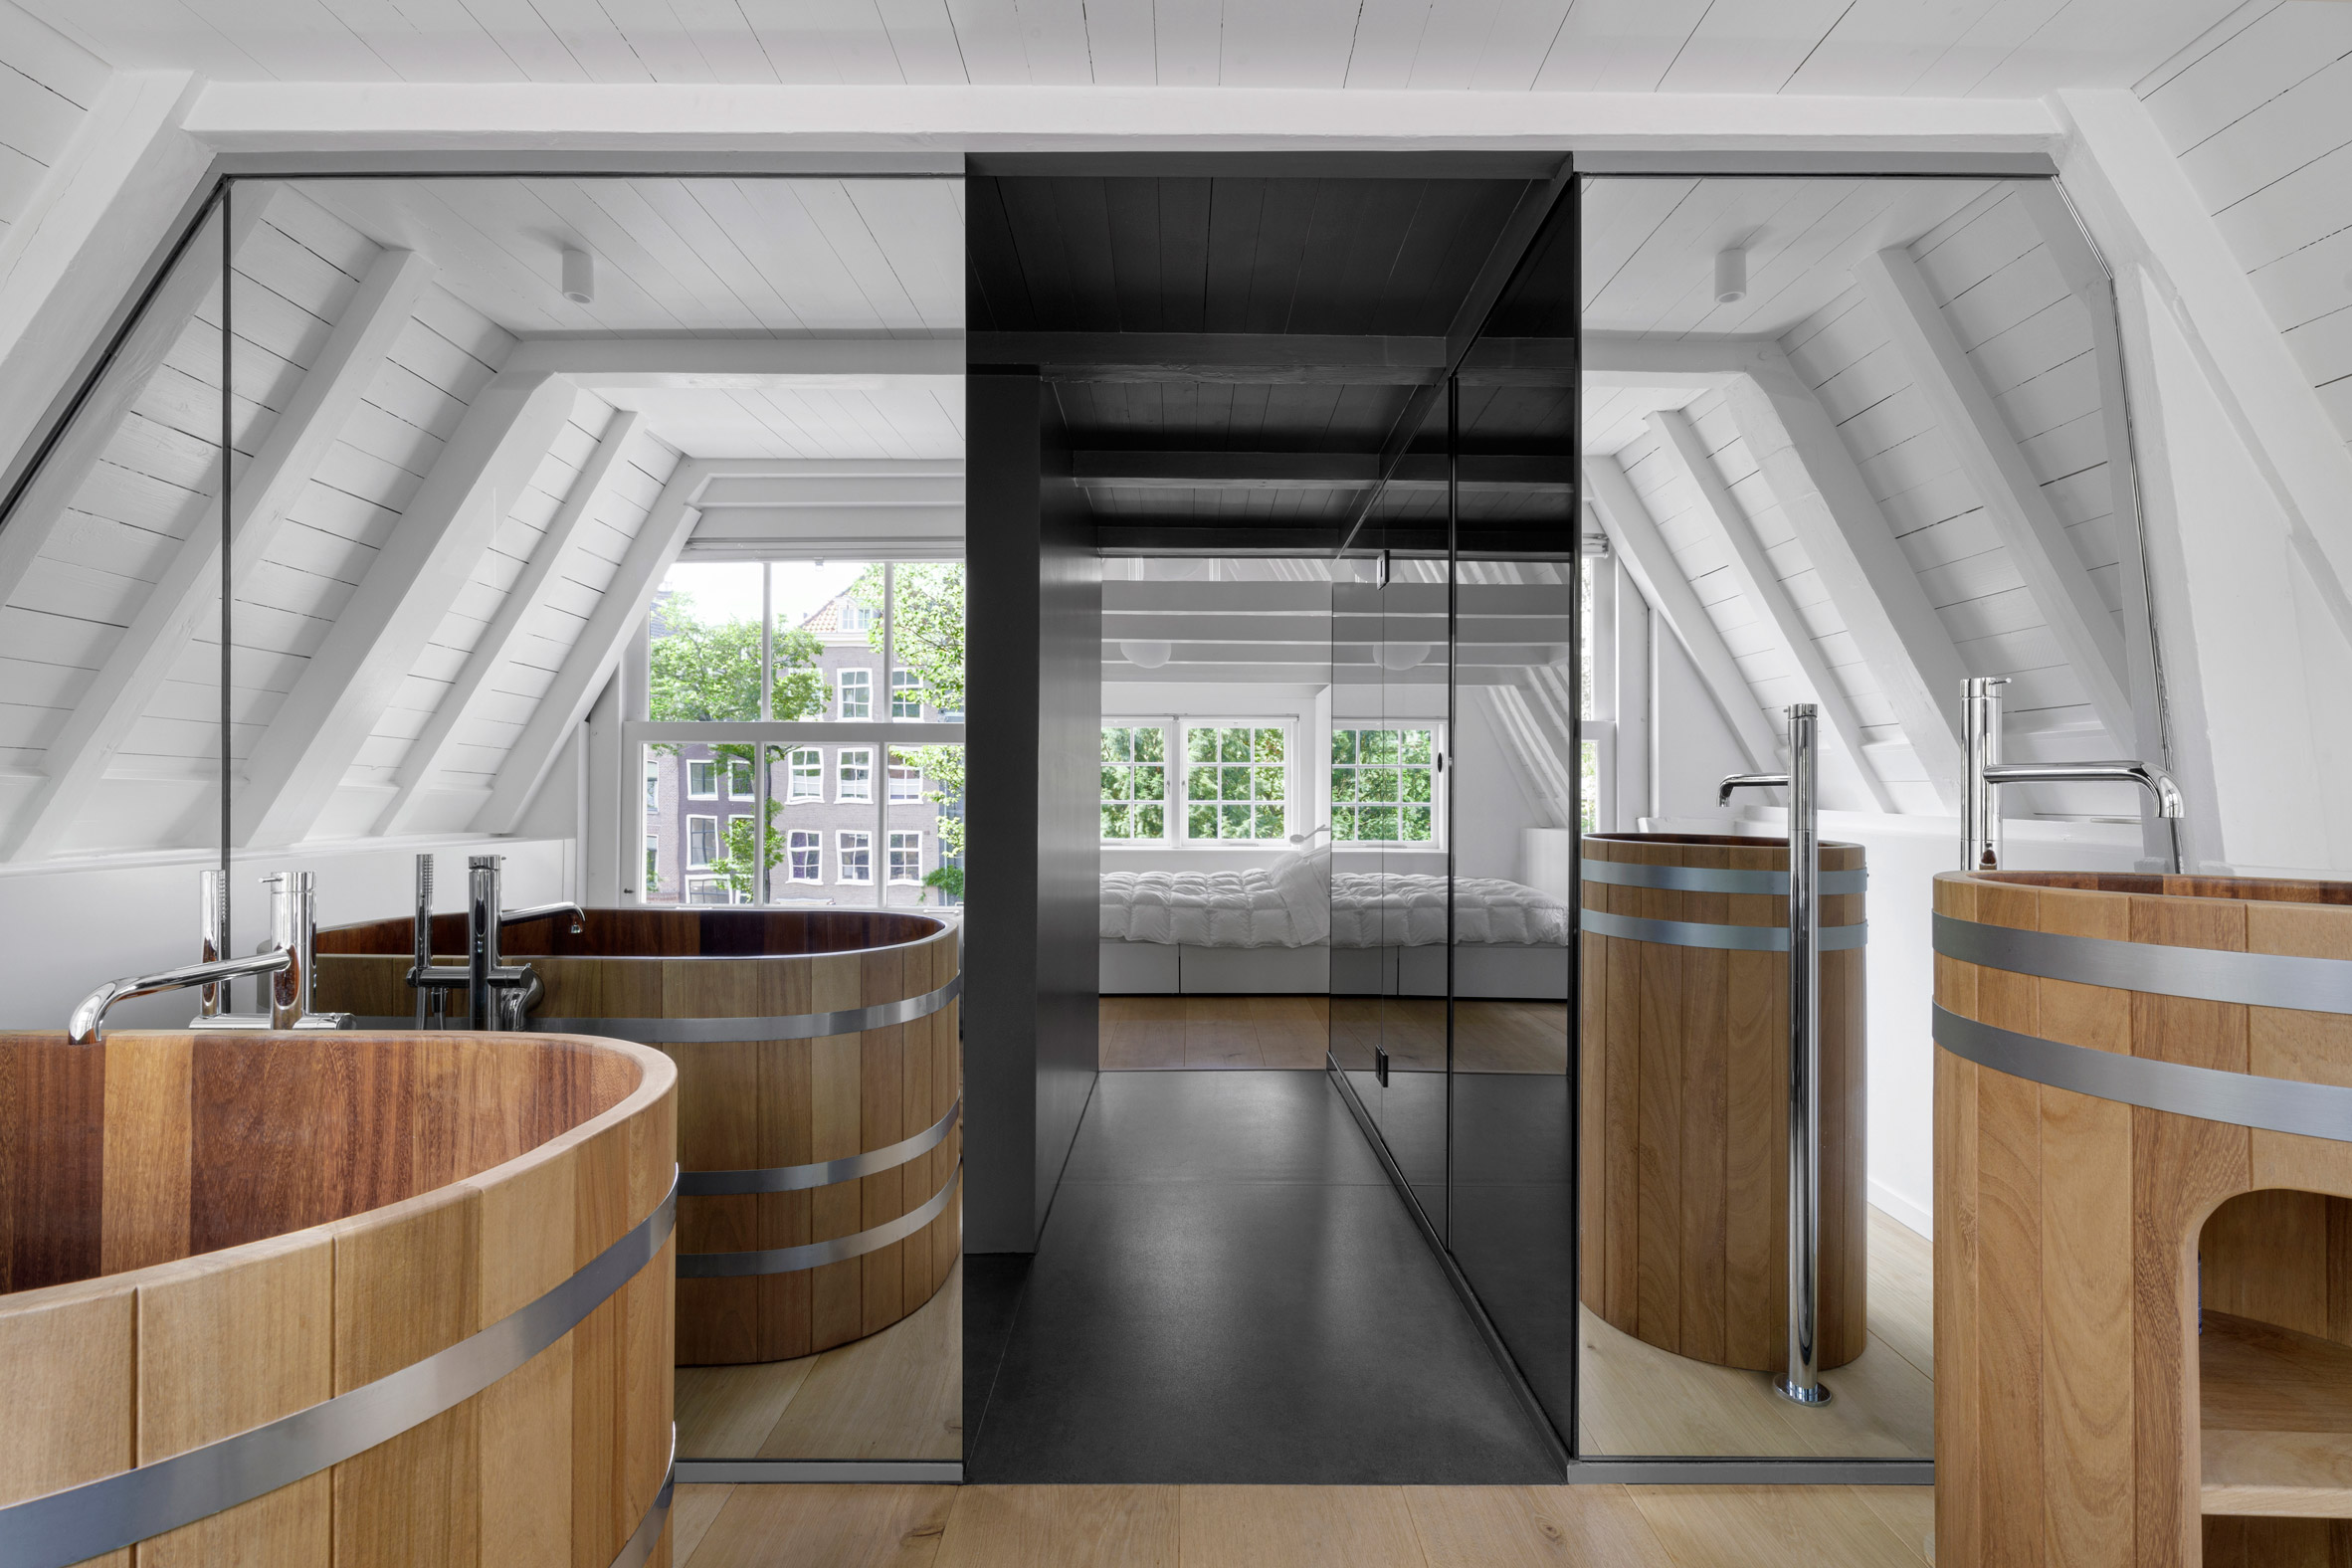 Canal House in Amsterdam designed by i29